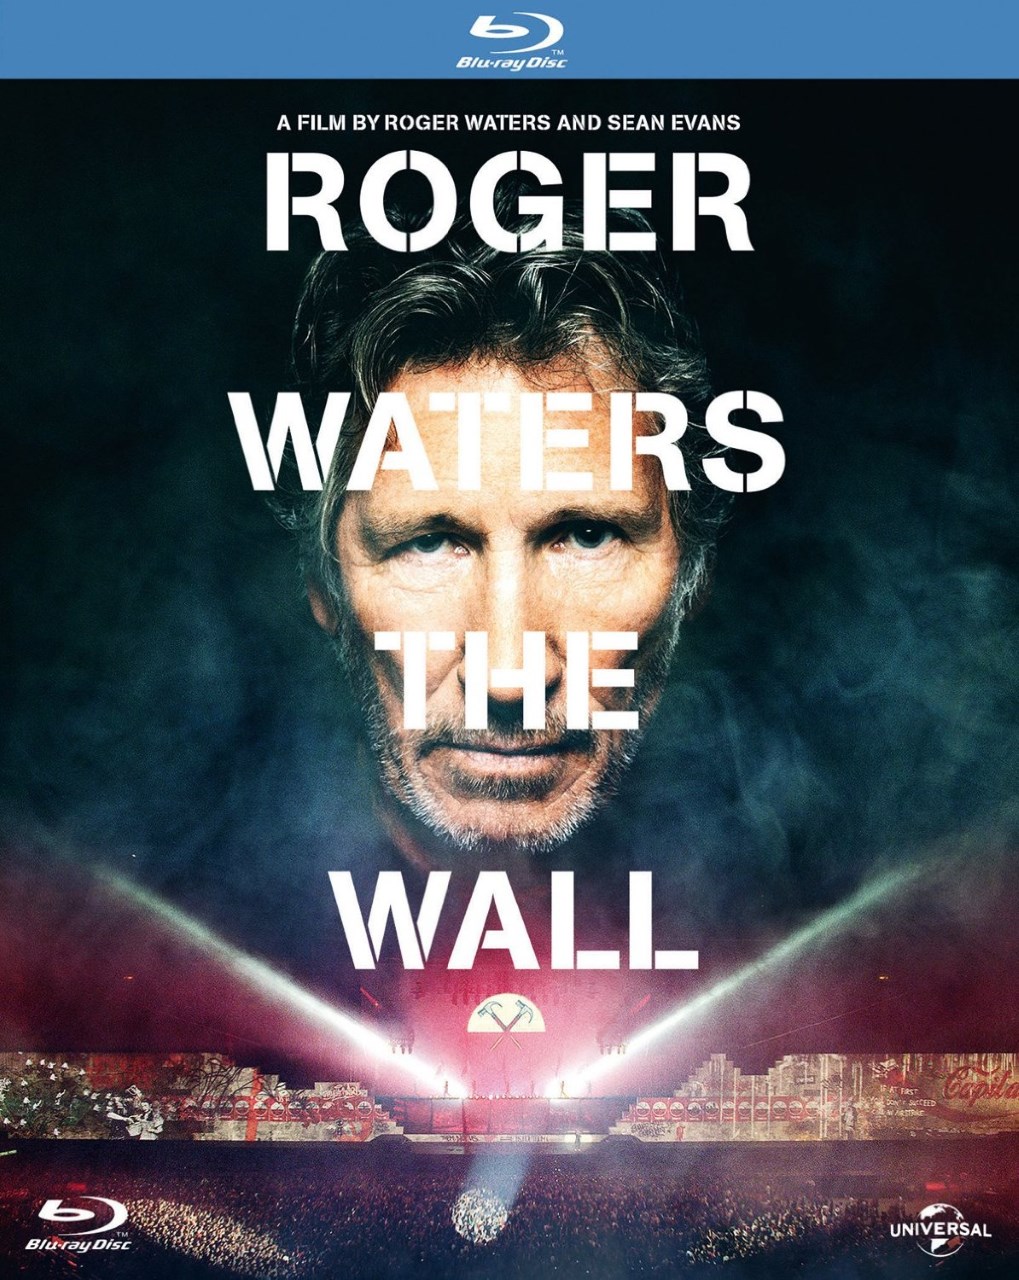 Roger Waters - Roger Waters the Wall